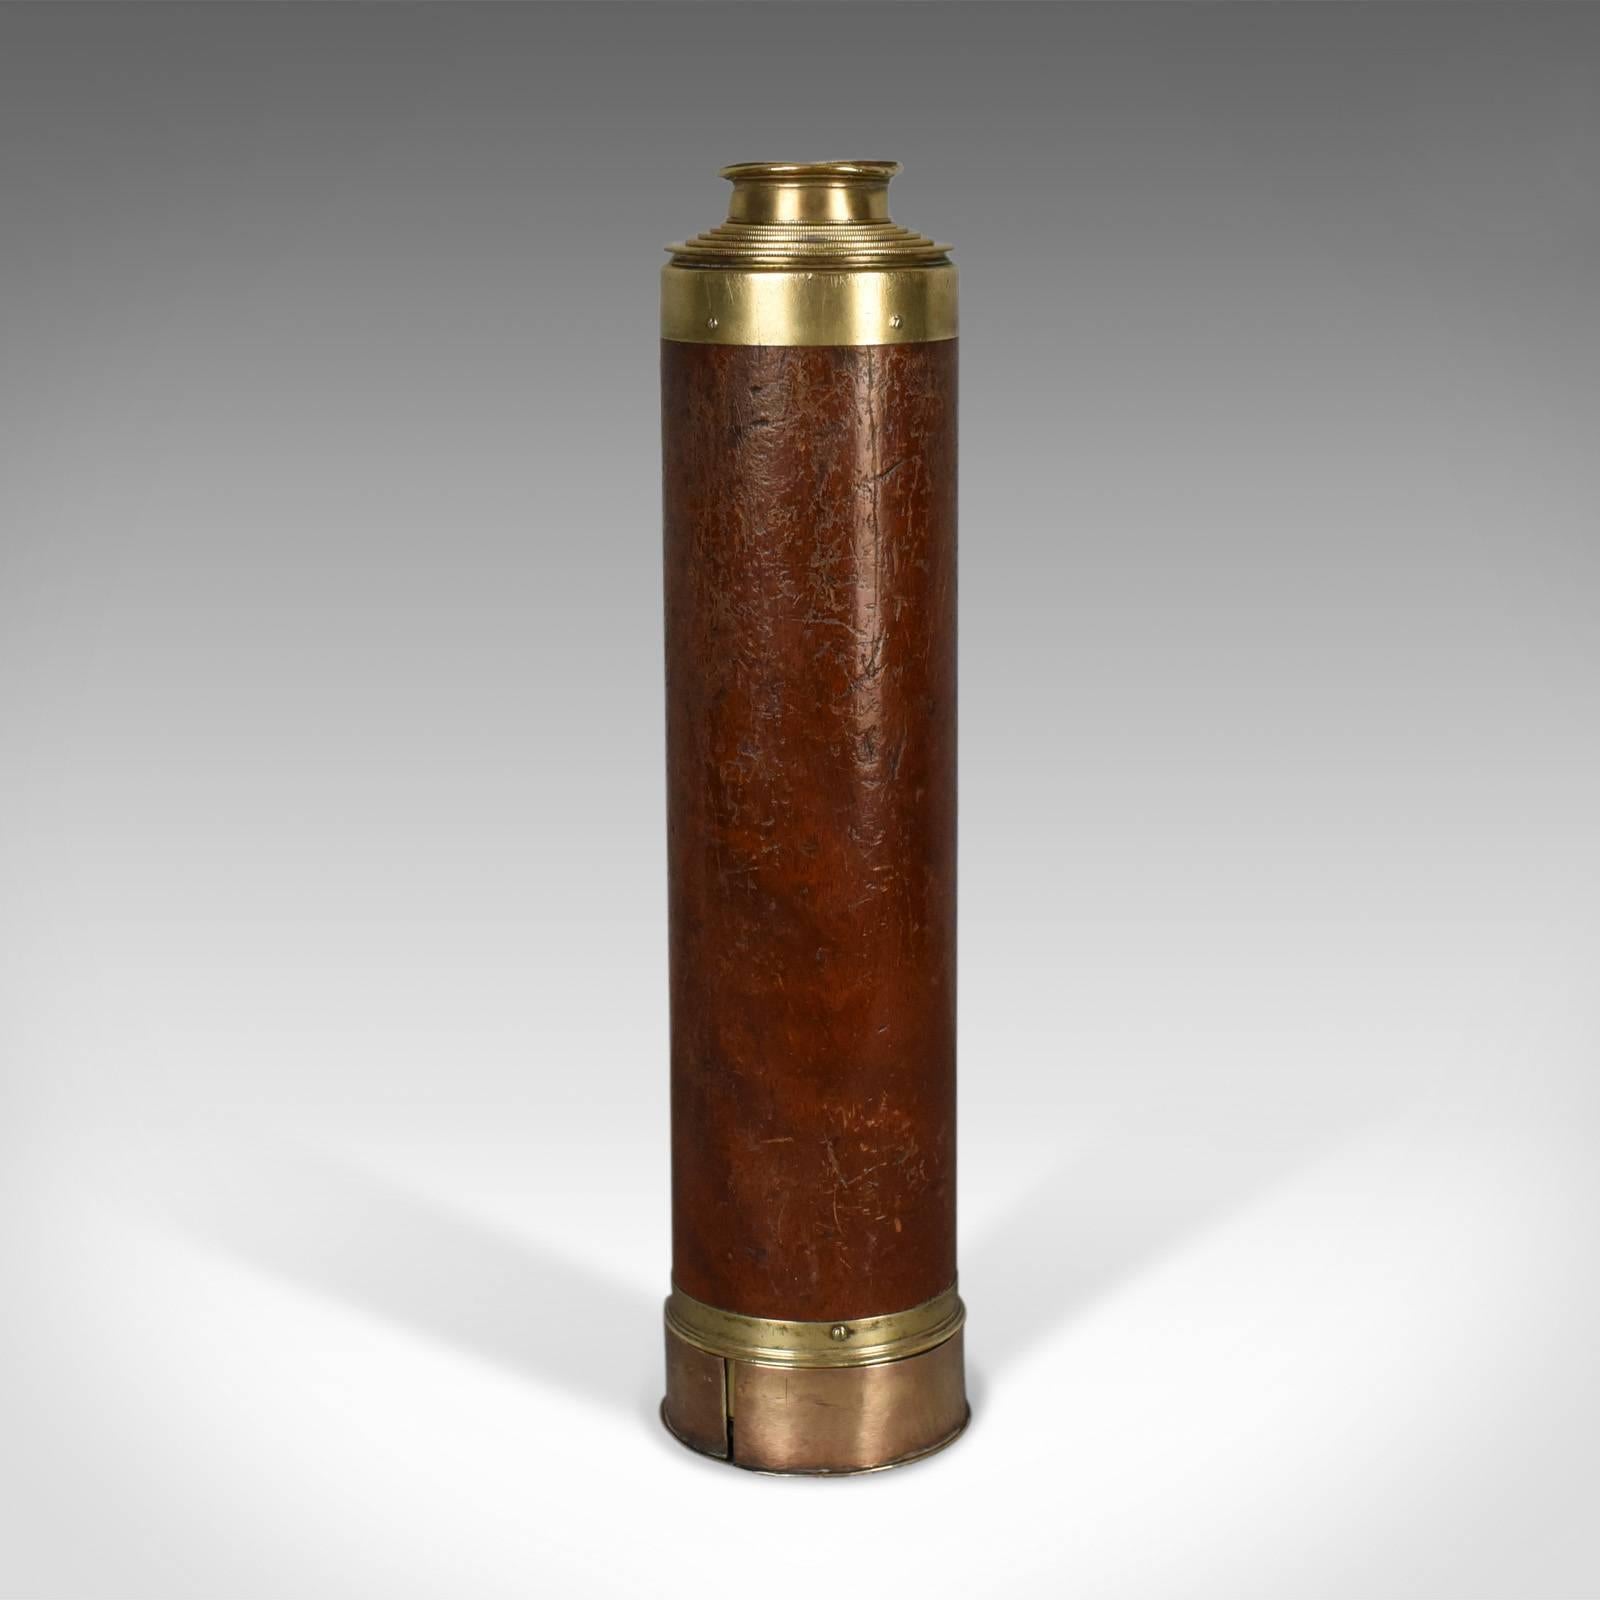 This is an antique telescope, a five draw refractor for terrestrial or astronomical use. An English Georgian piece dating to circa 1820.

Perfect for bird watching, landscape appreciation, wildlife, or maritime observation. Equally suitable for